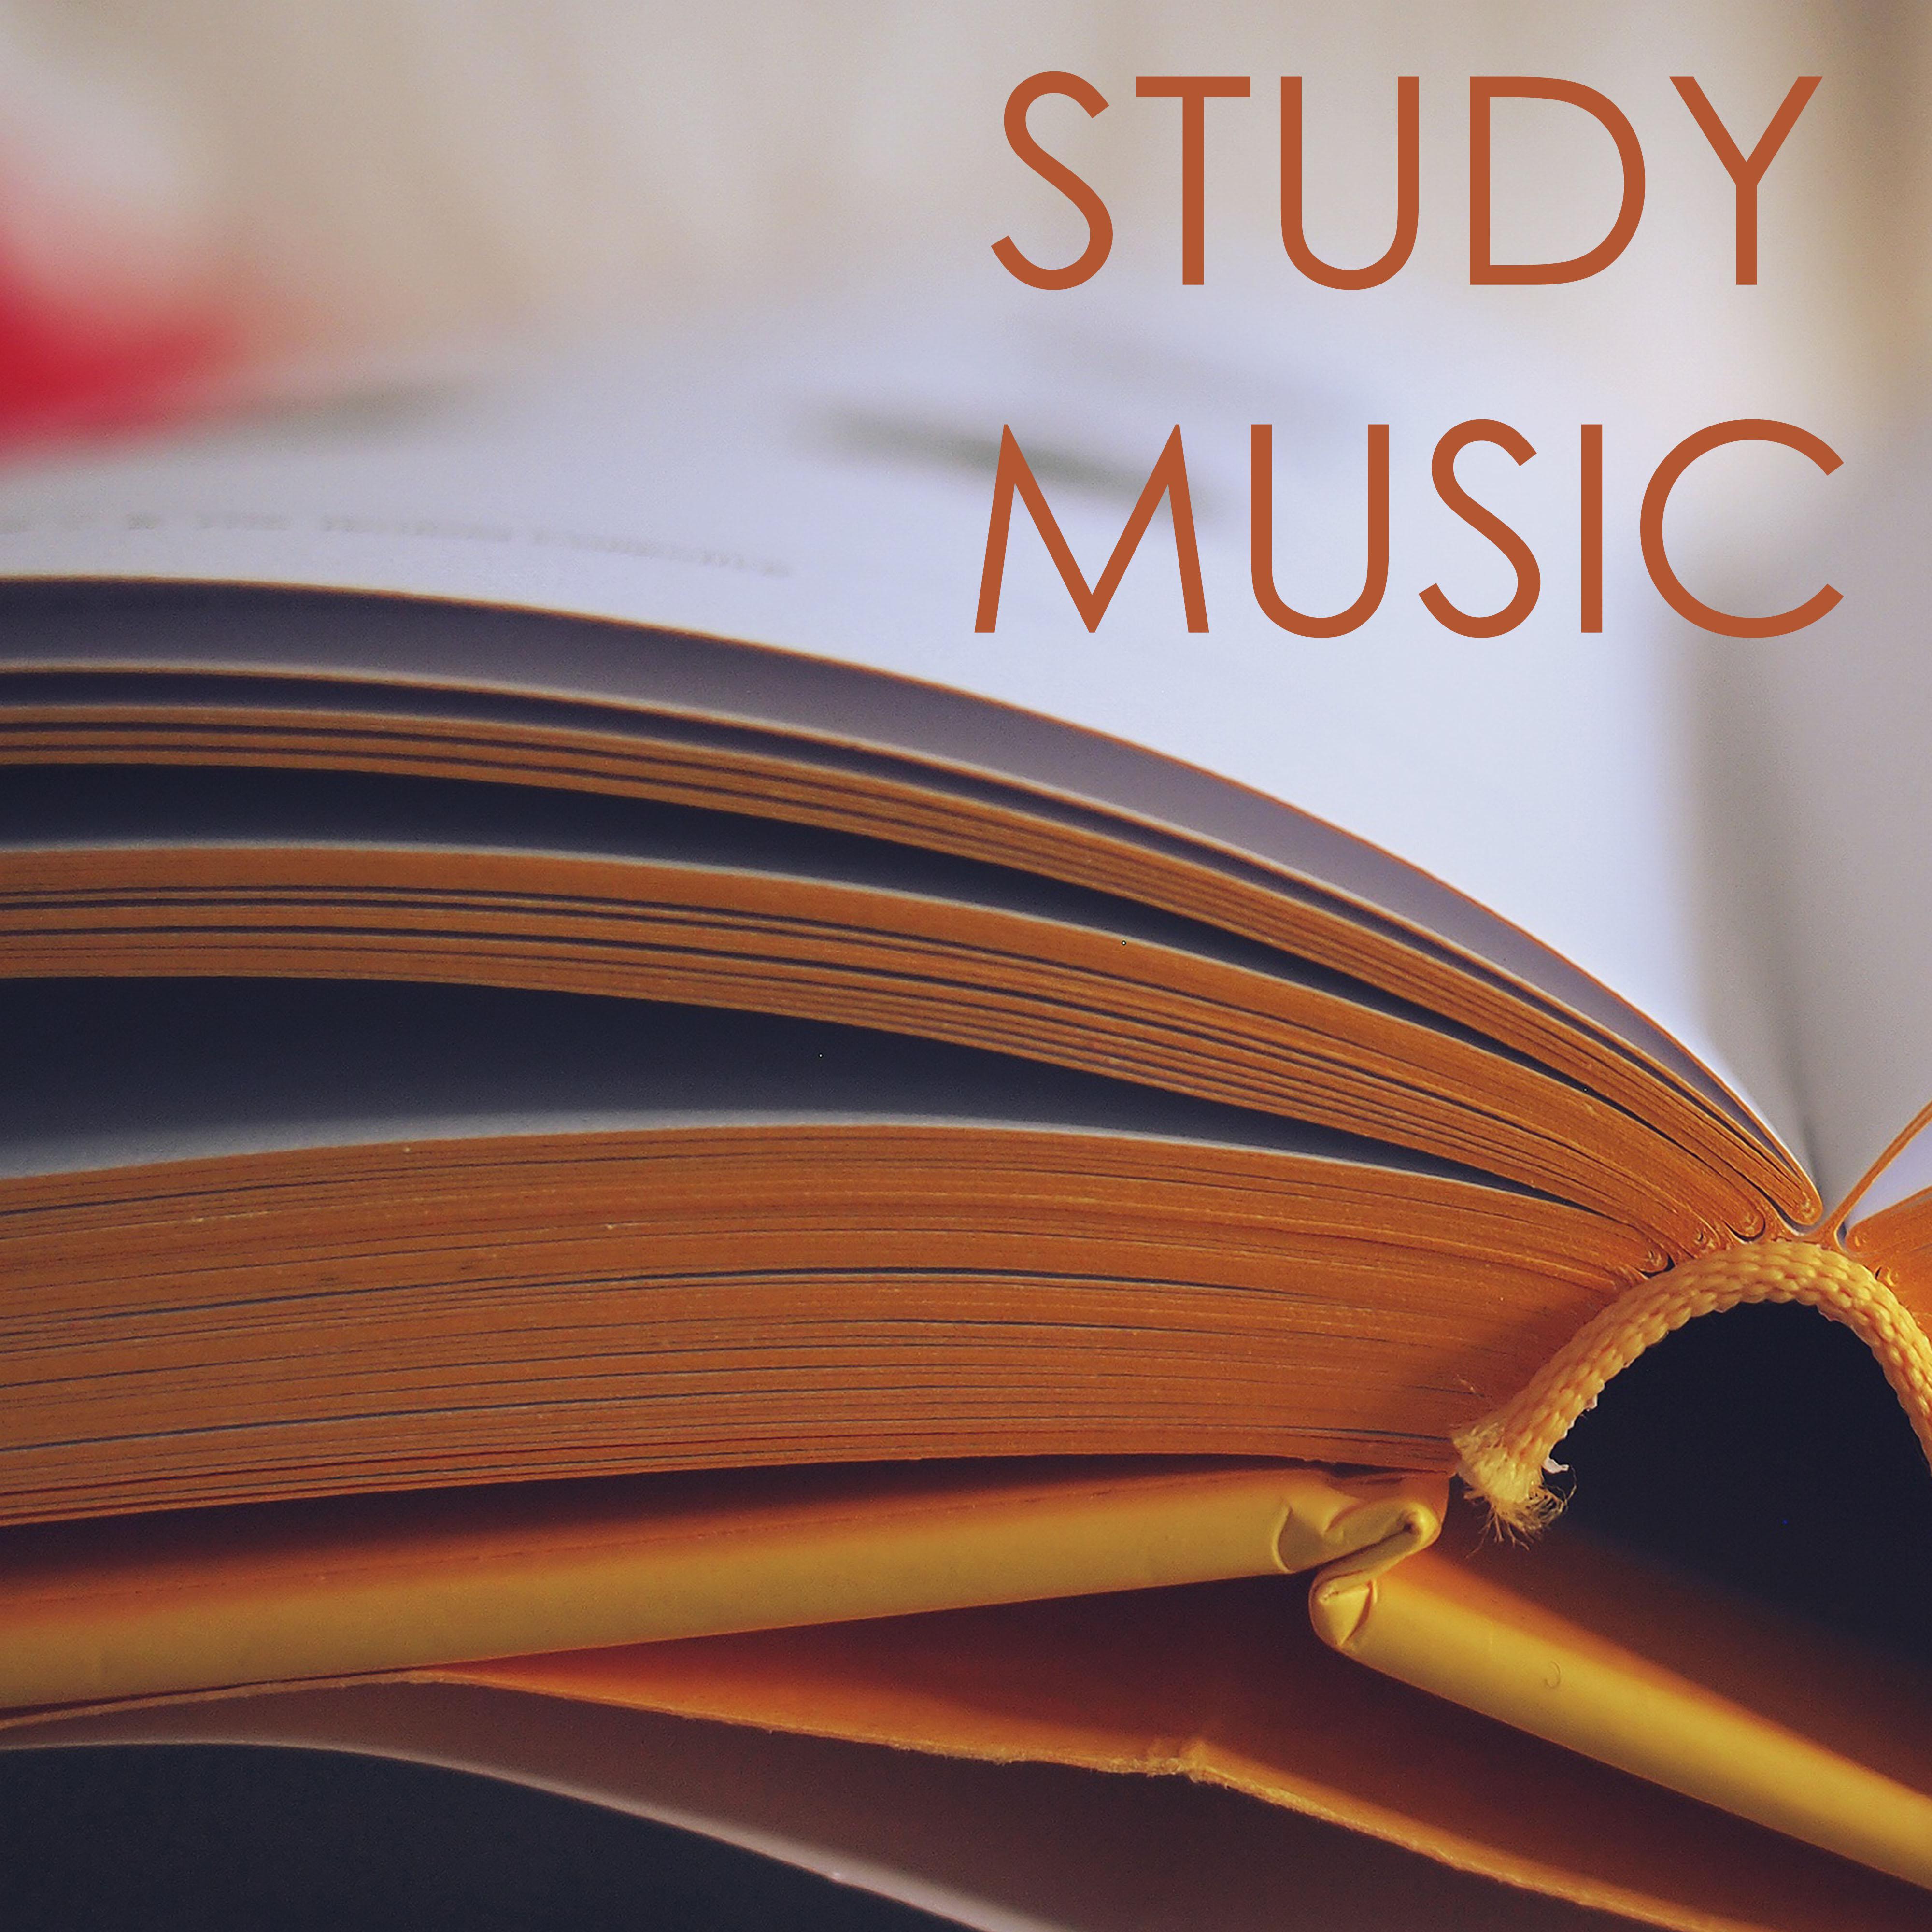 Study Music Playlist - Best Background Studying Songs